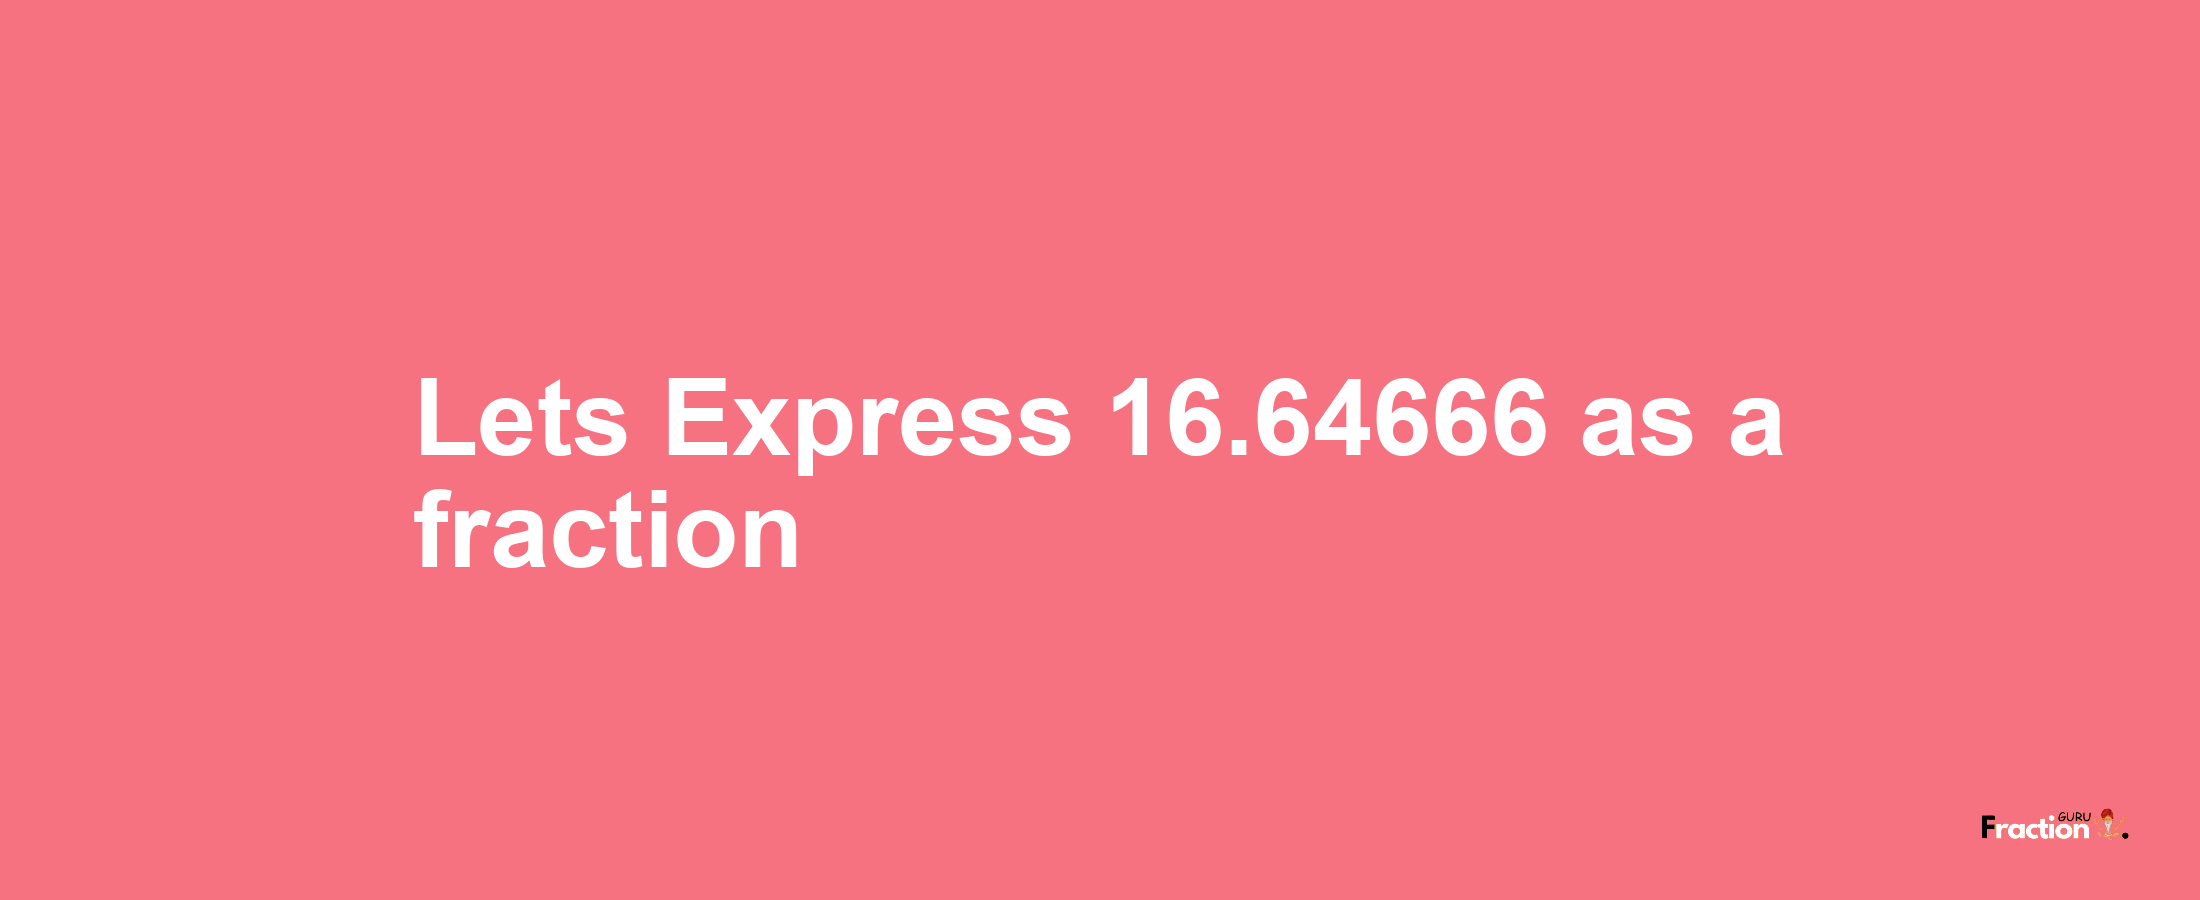 Lets Express 16.64666 as afraction